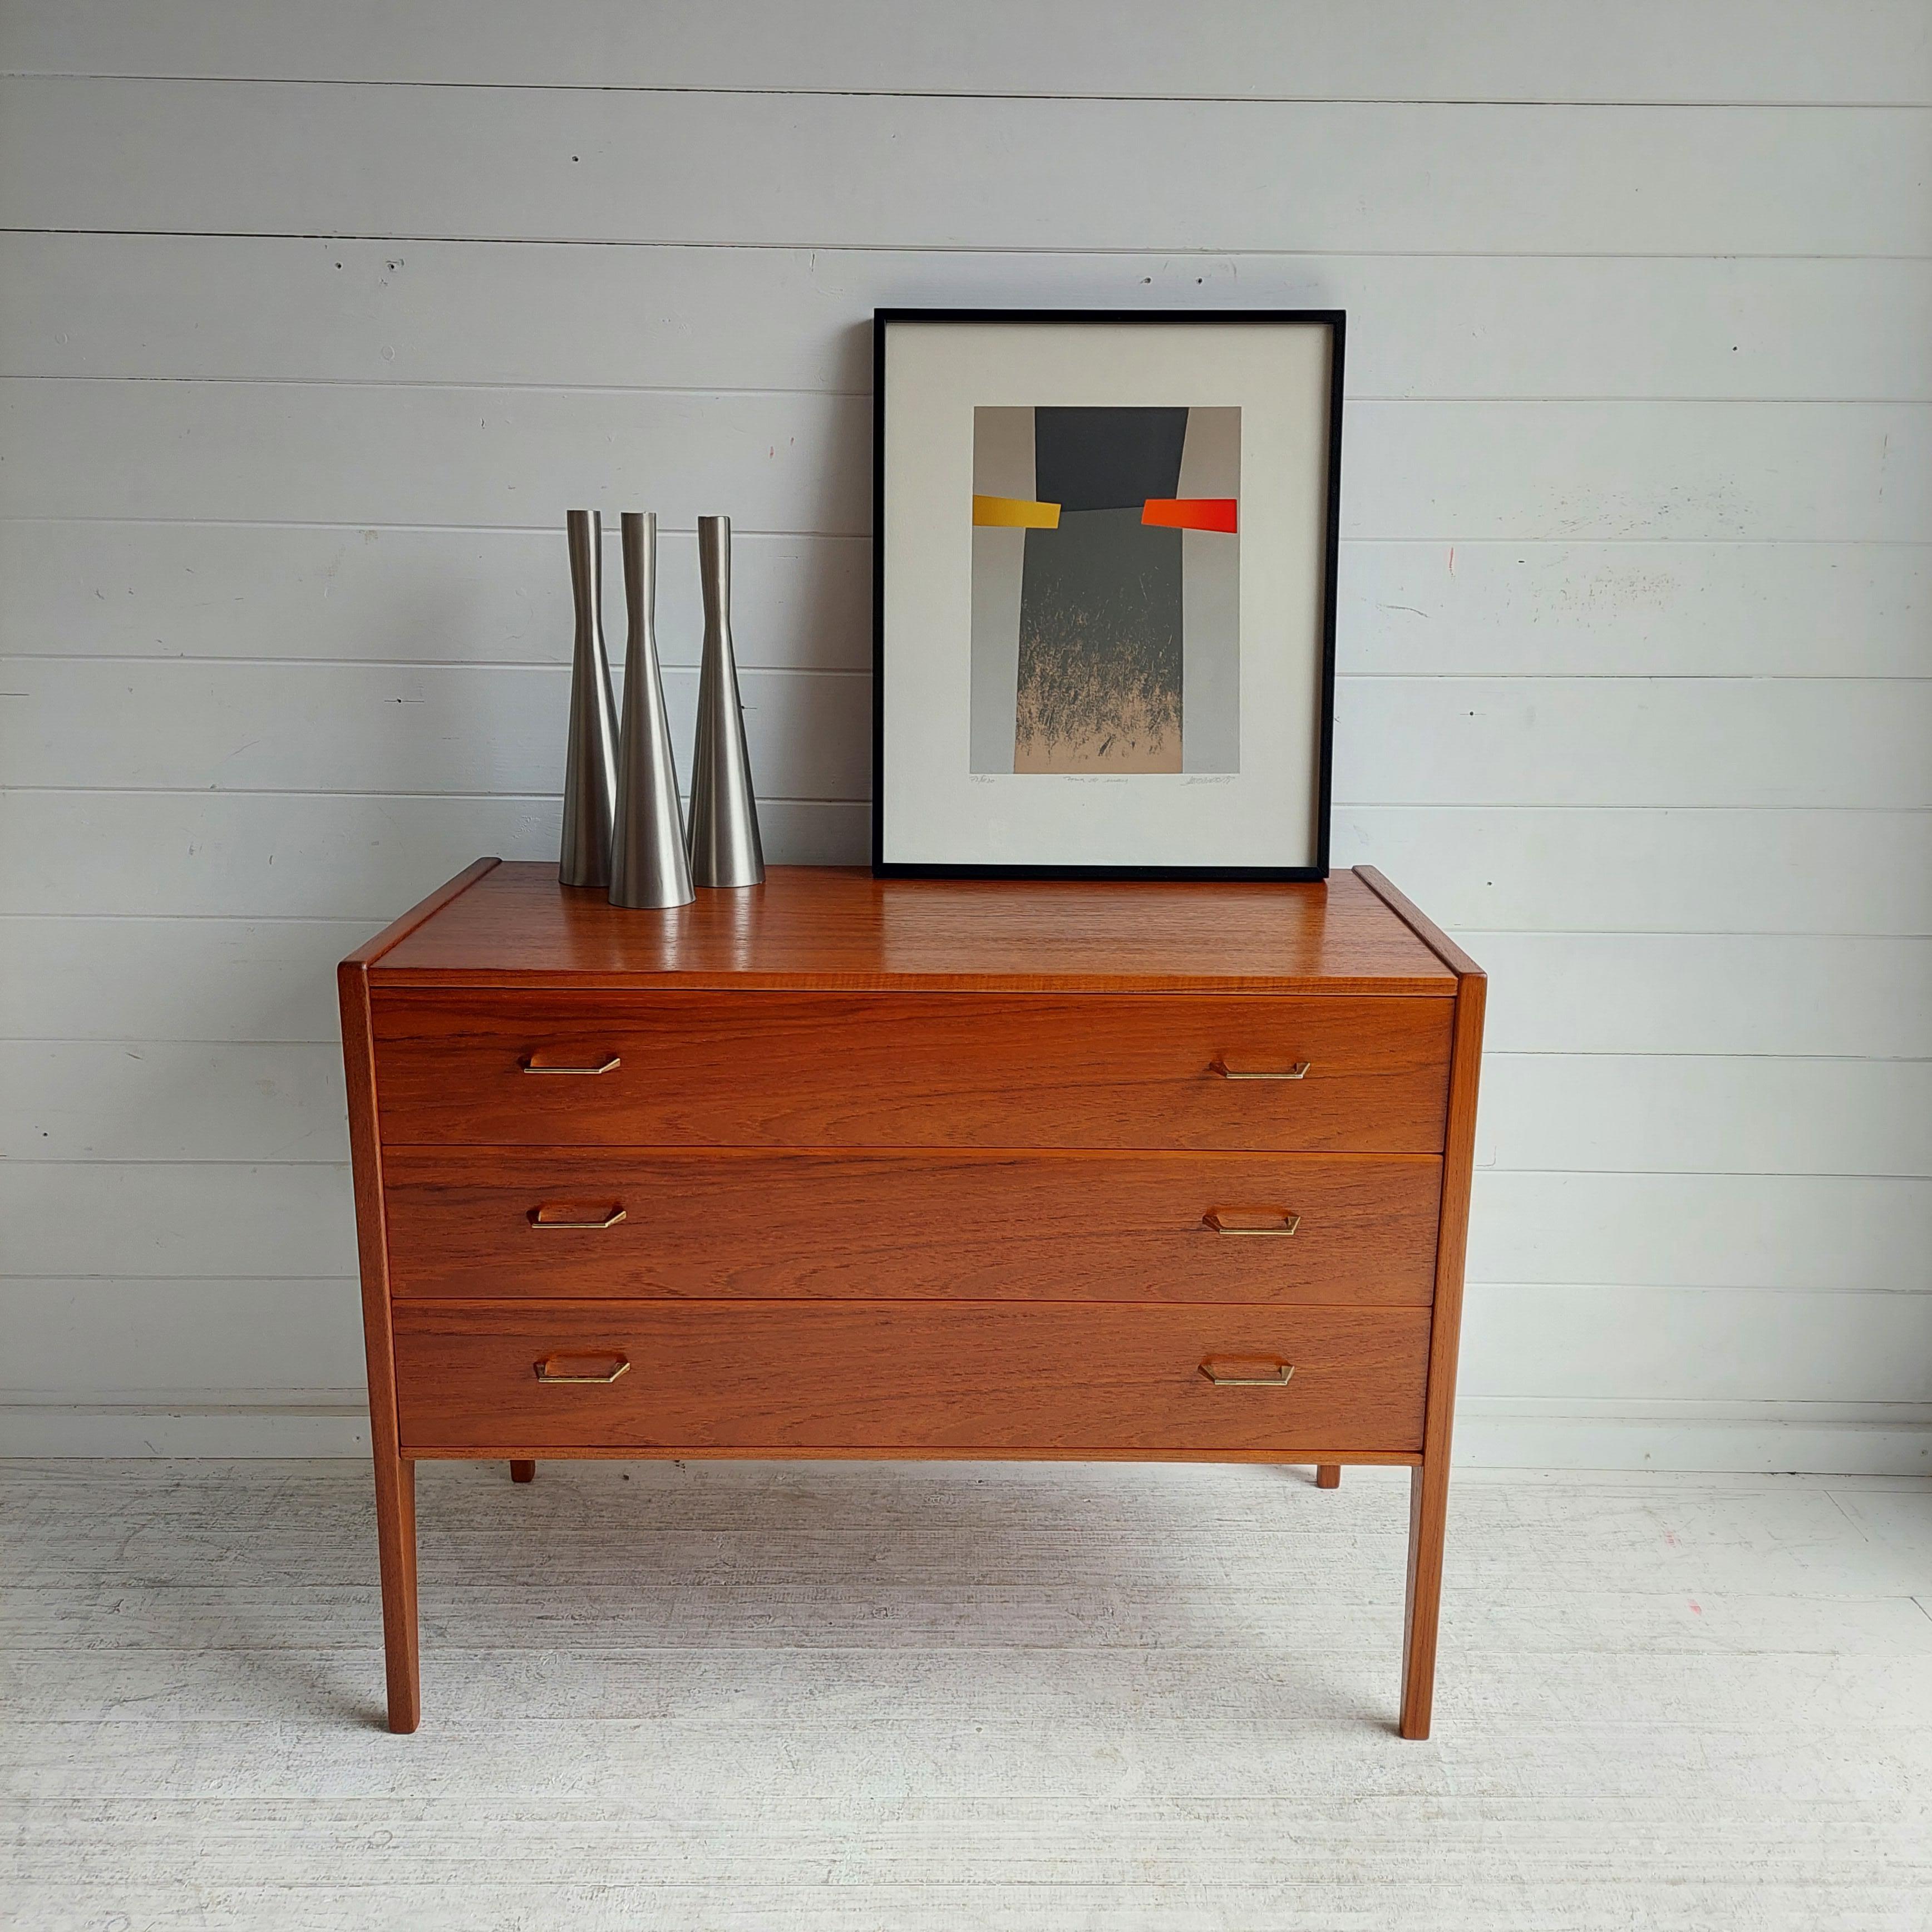 Teak Chest of 3 drawers  by Aksel Kjersgaard for Odder Mobelfabrik in Denmark in the 1960s. 
It is model 34. 
Commonly attributed to Kai Kristiansen

Features:
Wonderful teak grain
The way the legs continue in the body of the chest is remarkable.